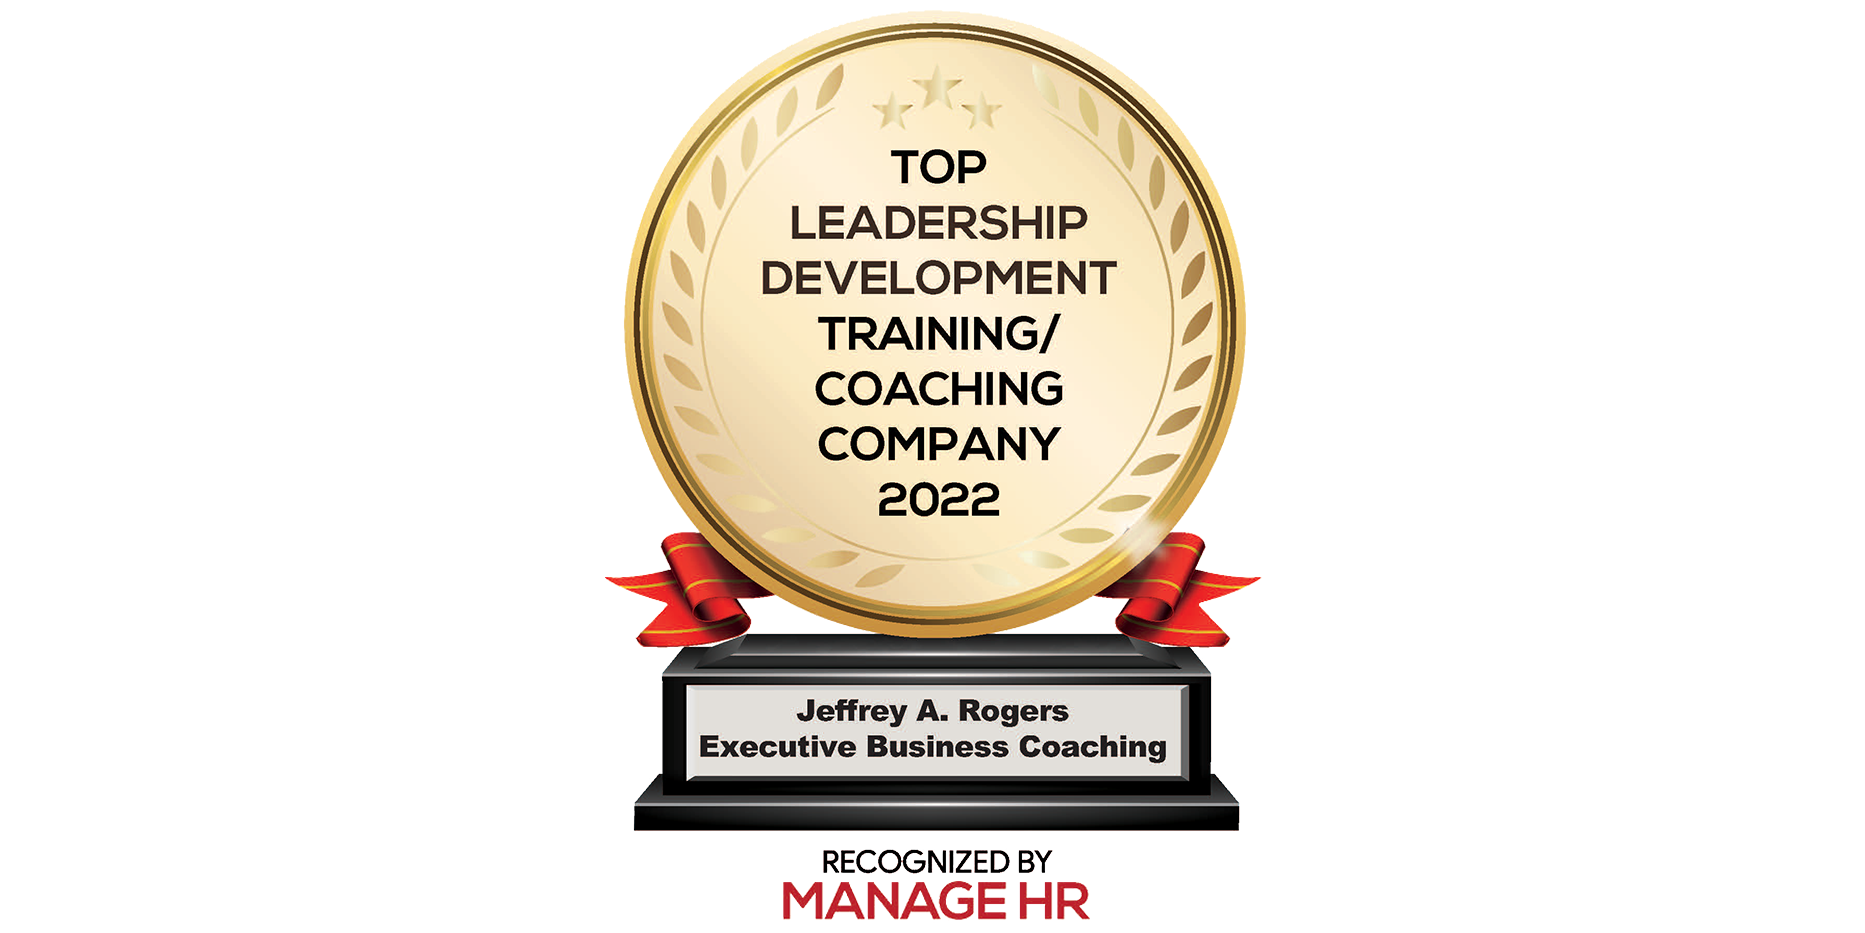 Attachment Details  Top-Leadership-Development-Training-Coaching-Company-2022-Jeffrey-A-Rogers-Executive-Business-Coaching-Recognized-by-Manage-HR